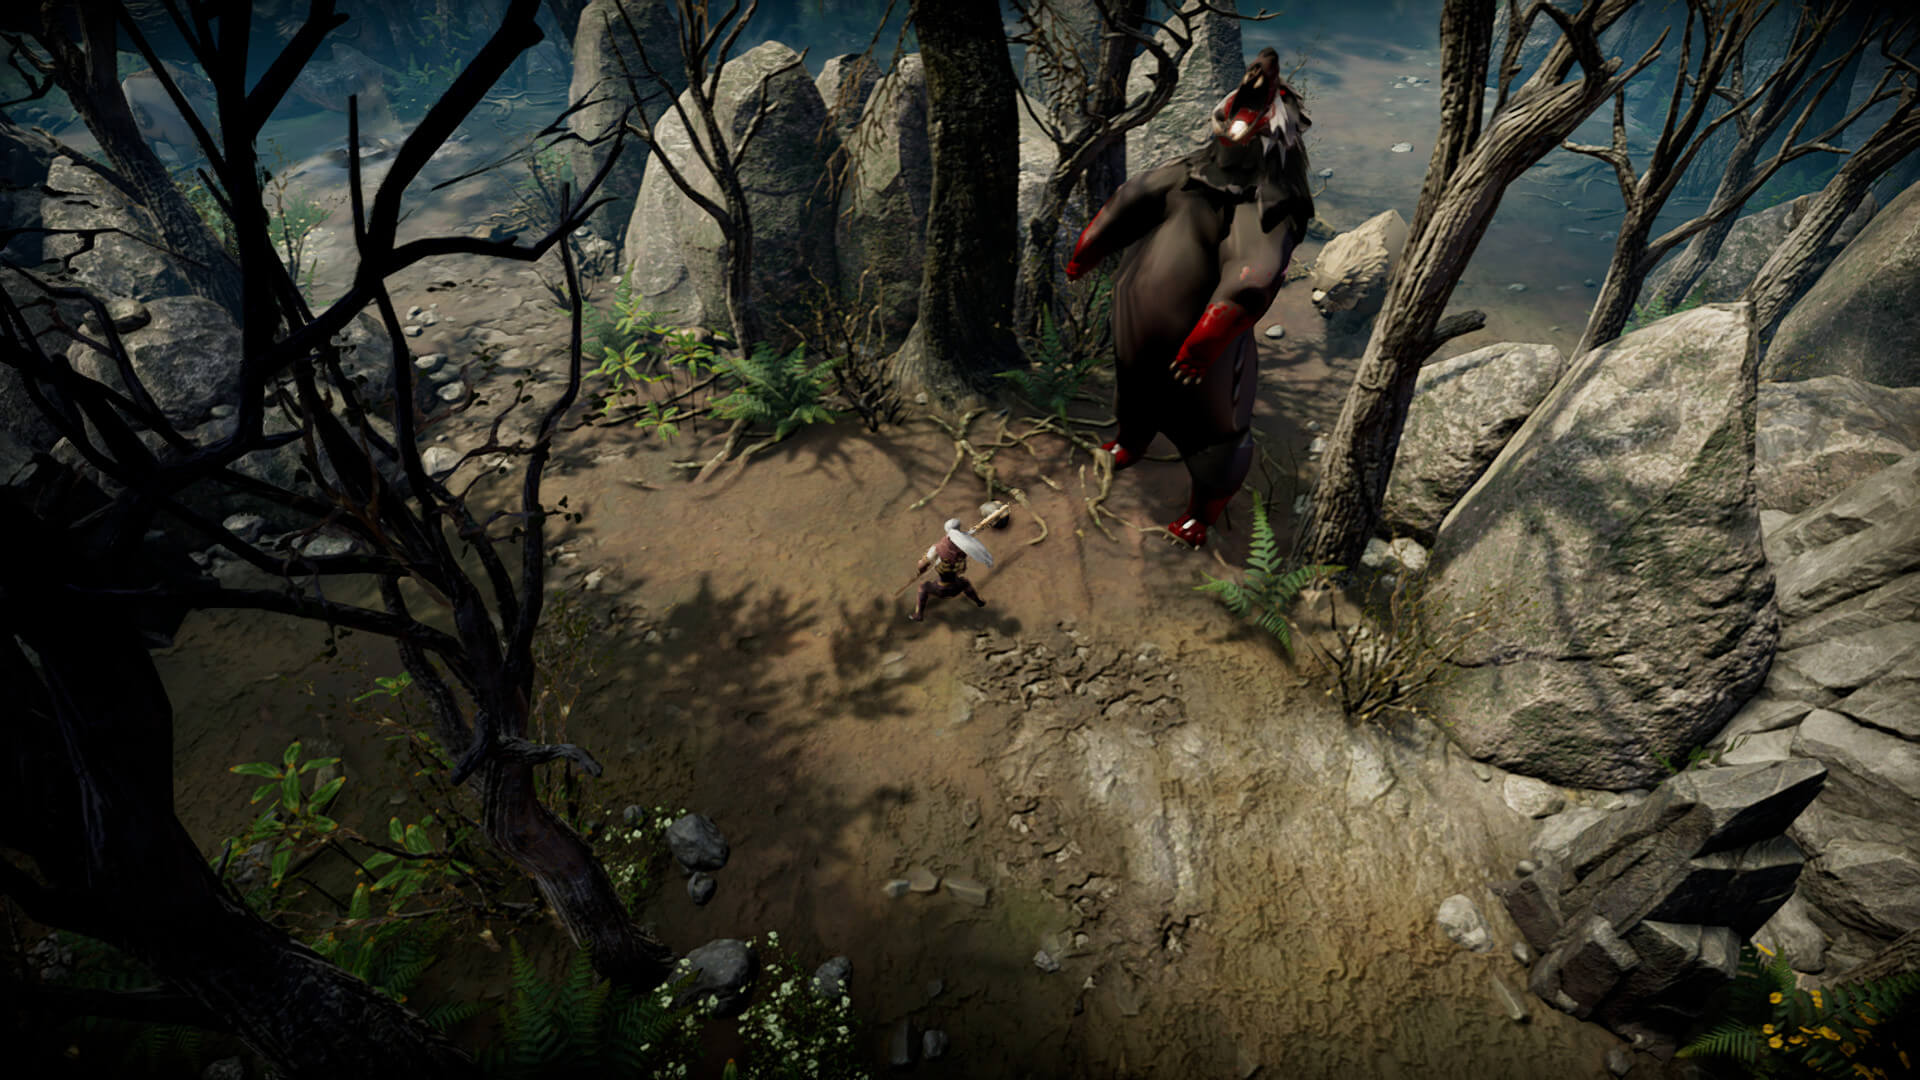 A player engaged in combat with a giant bear enemy in V Rising